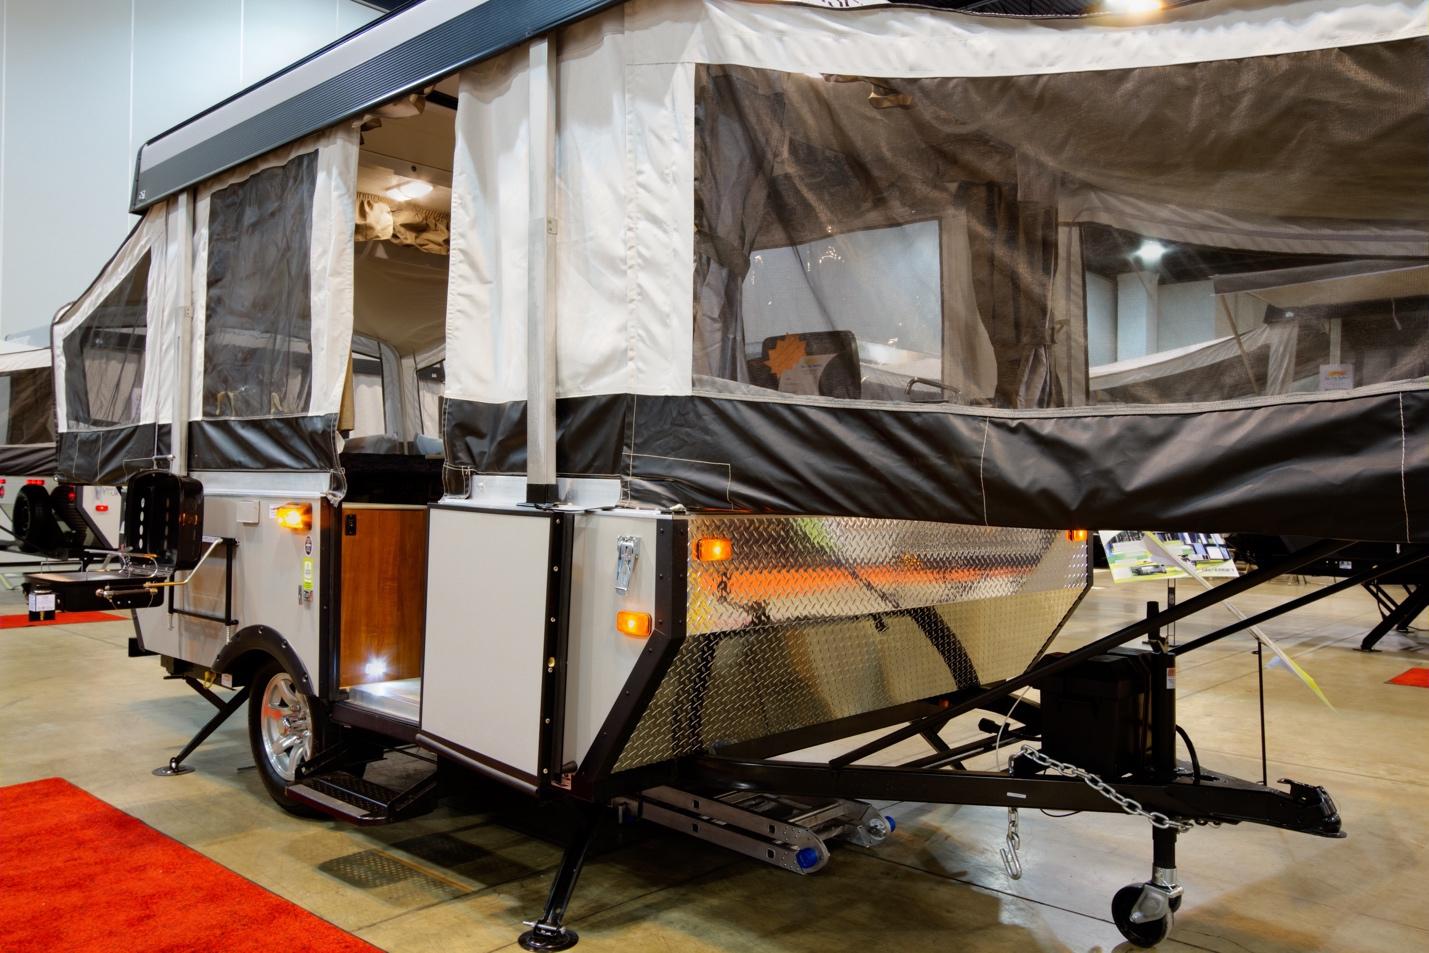 High-wall pop-up camper in an RV display roomd